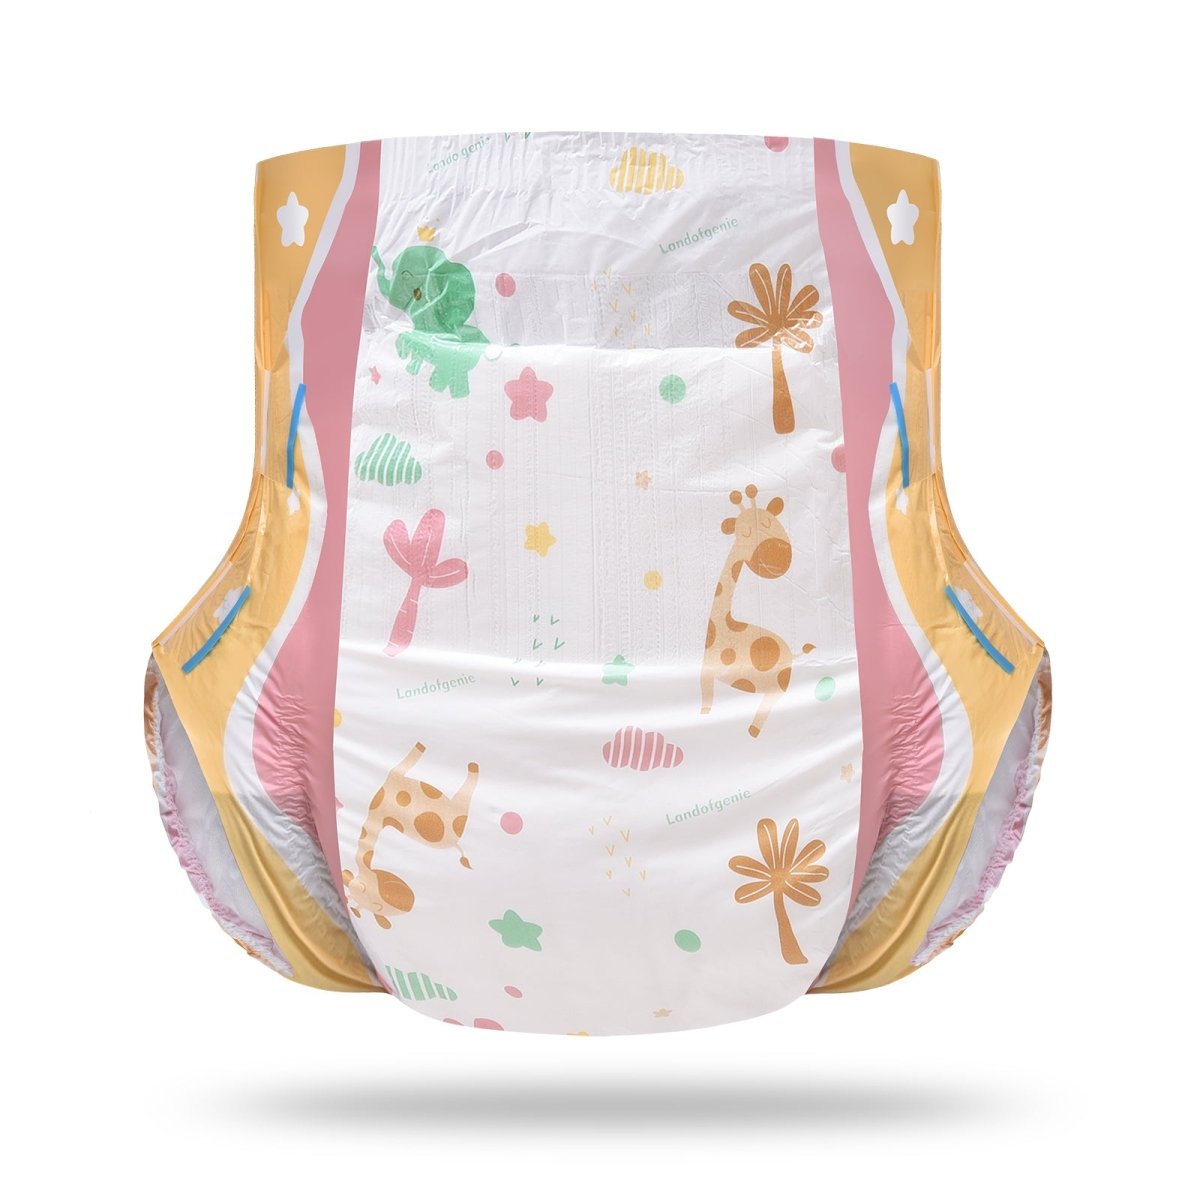 Landofgenie Adult ABDL Diapers Overnight Adult Diapers With 10 Pieces - Anime Giraffe and Elephant - landofgenie